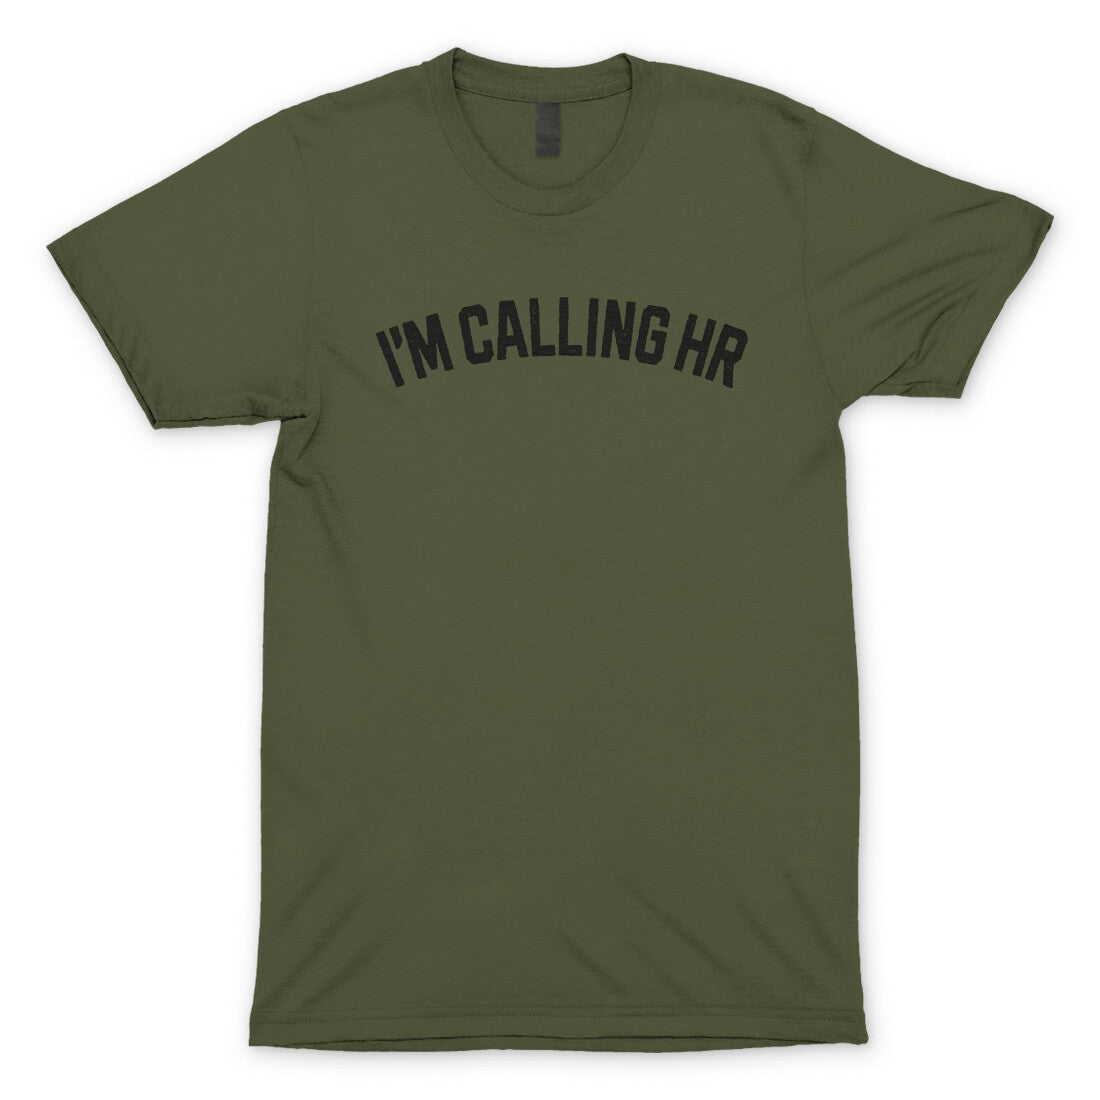 I'm Calling HR in Military Green Color